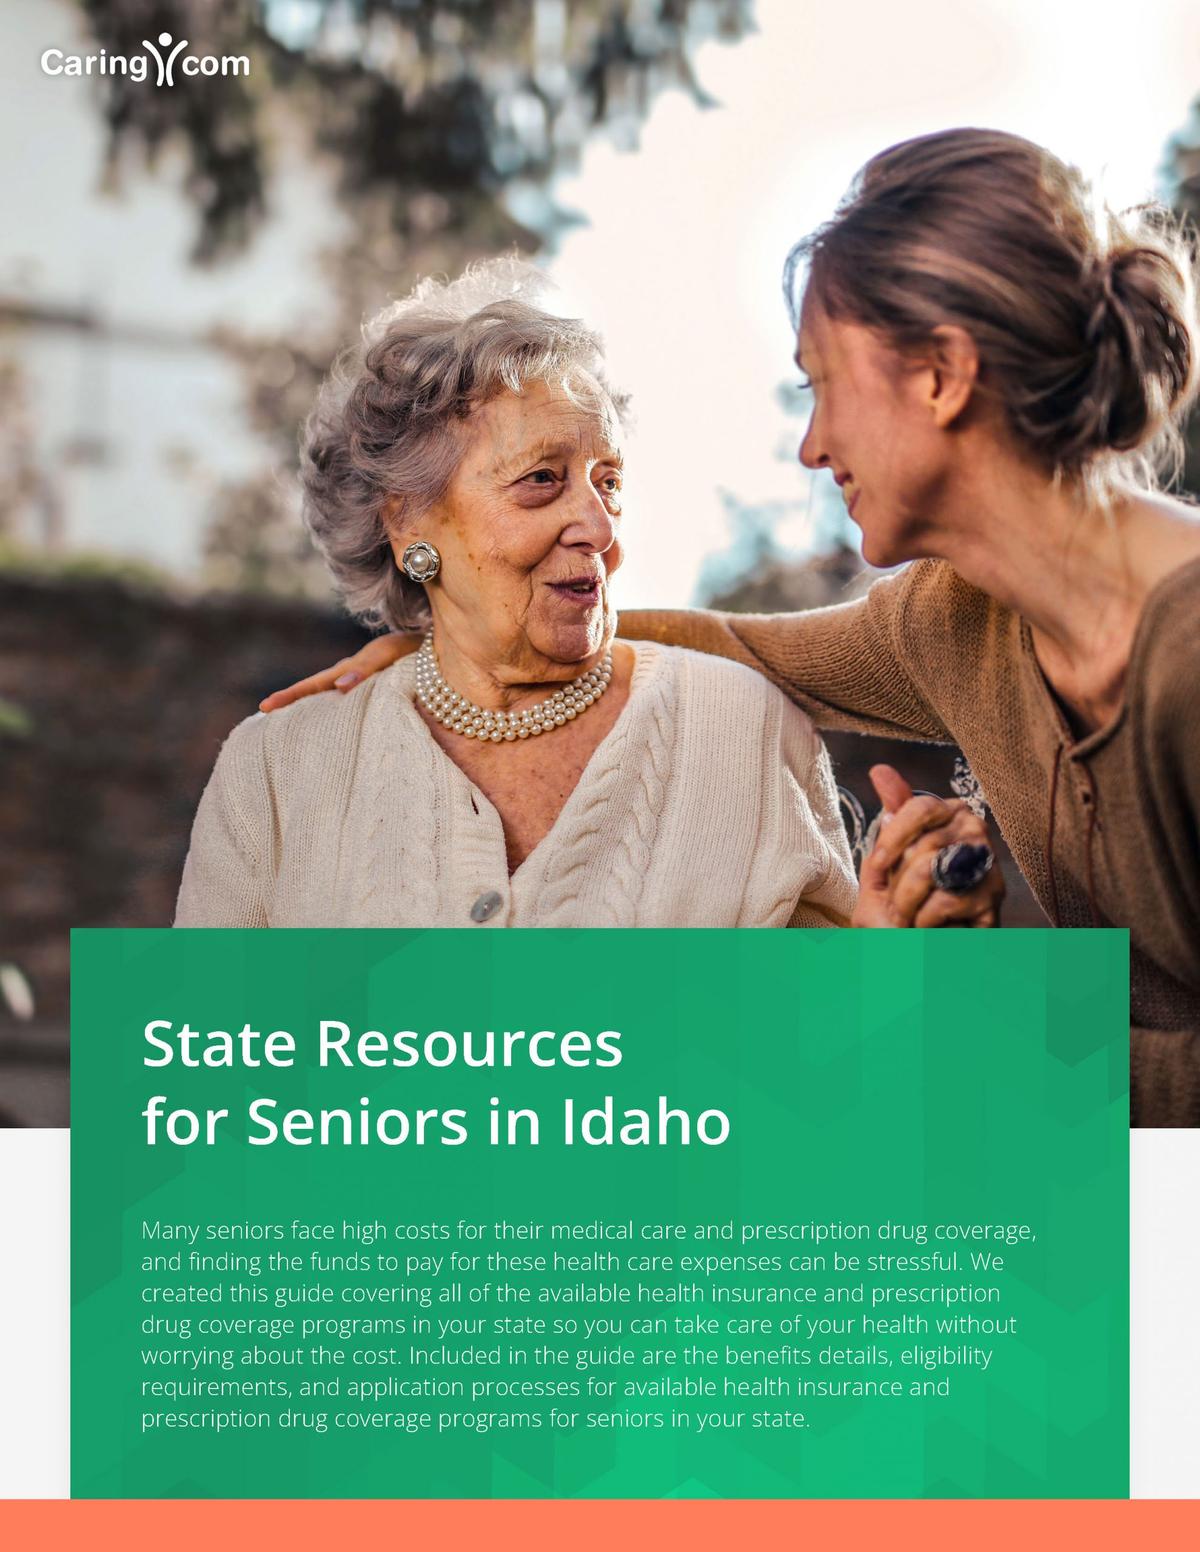 Financial Assistance for Prescriptions in Idaho